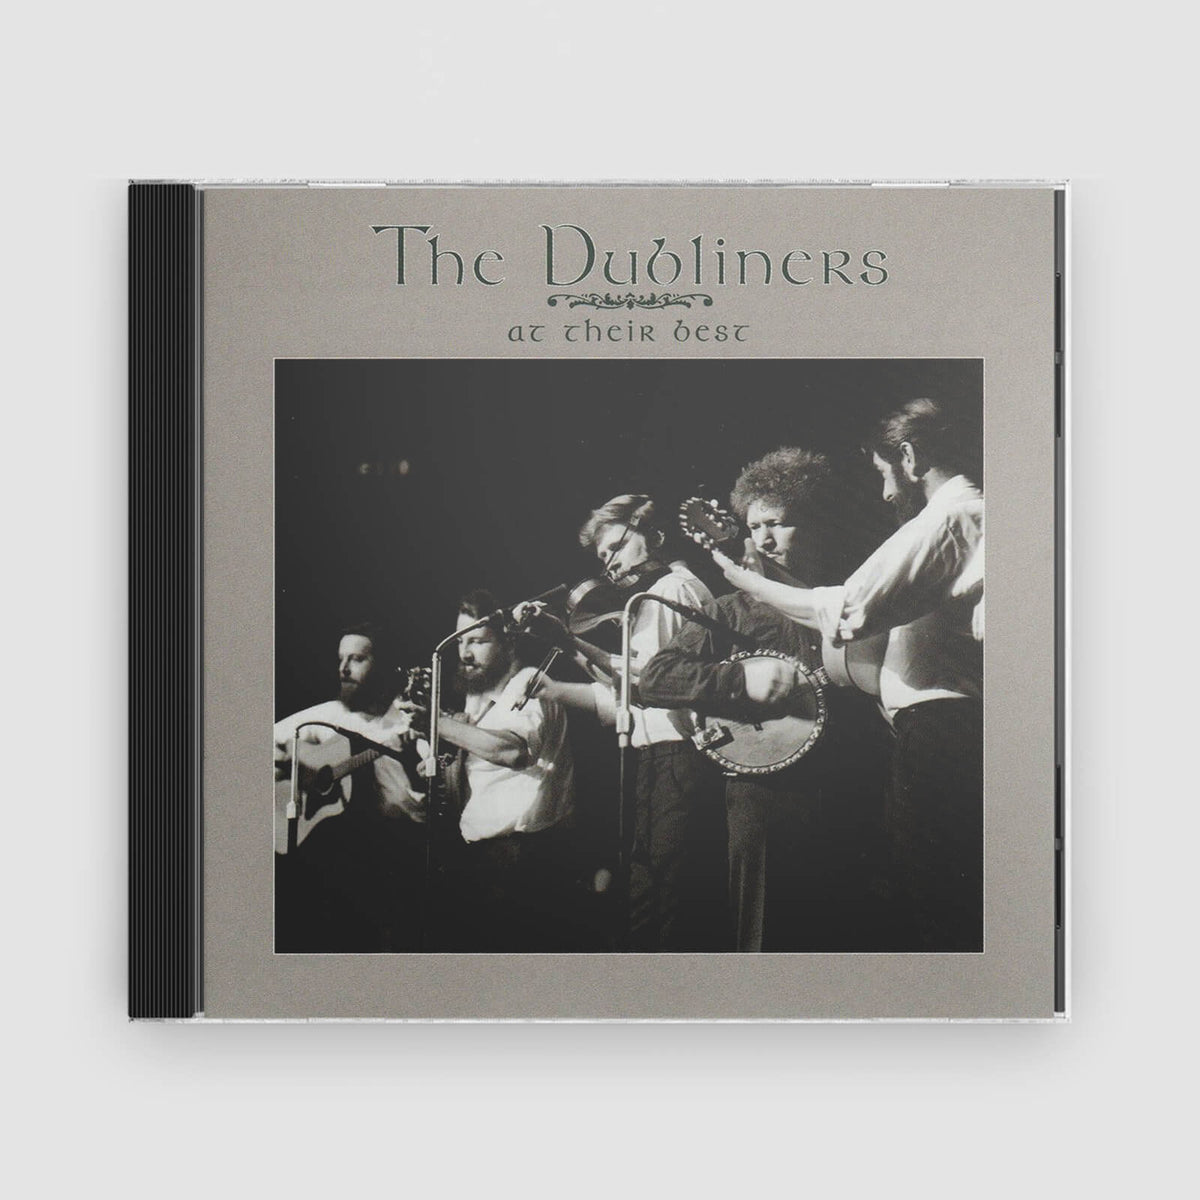 The Dubliners : The Dubliners At Their Best